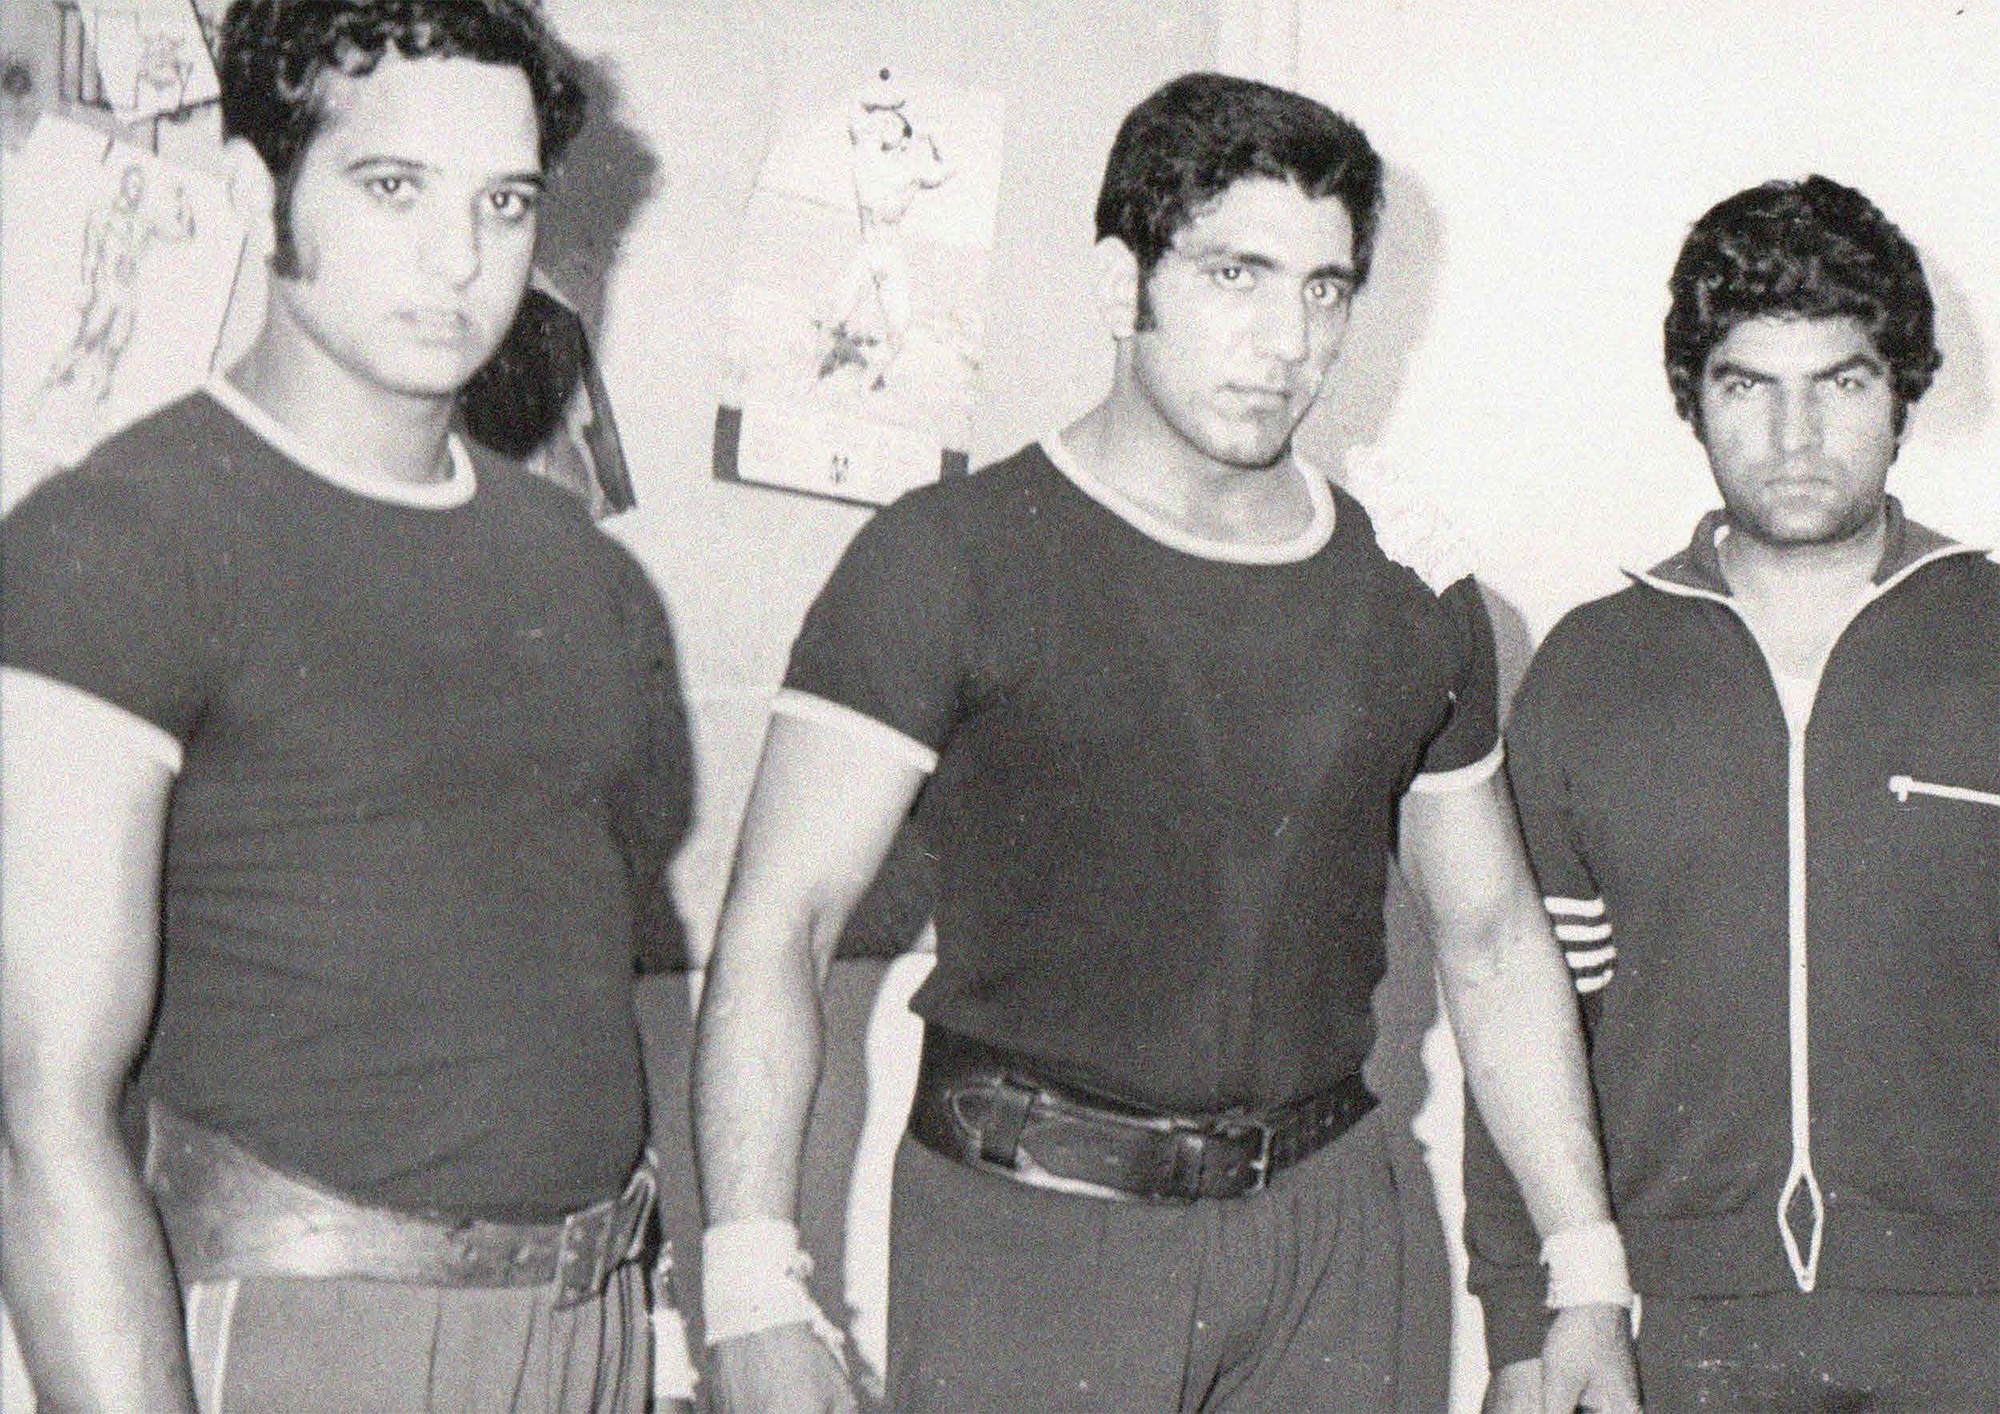 Three muscular young men (probably weightlifters) in sportswear, two with thick leather belts around their waists.